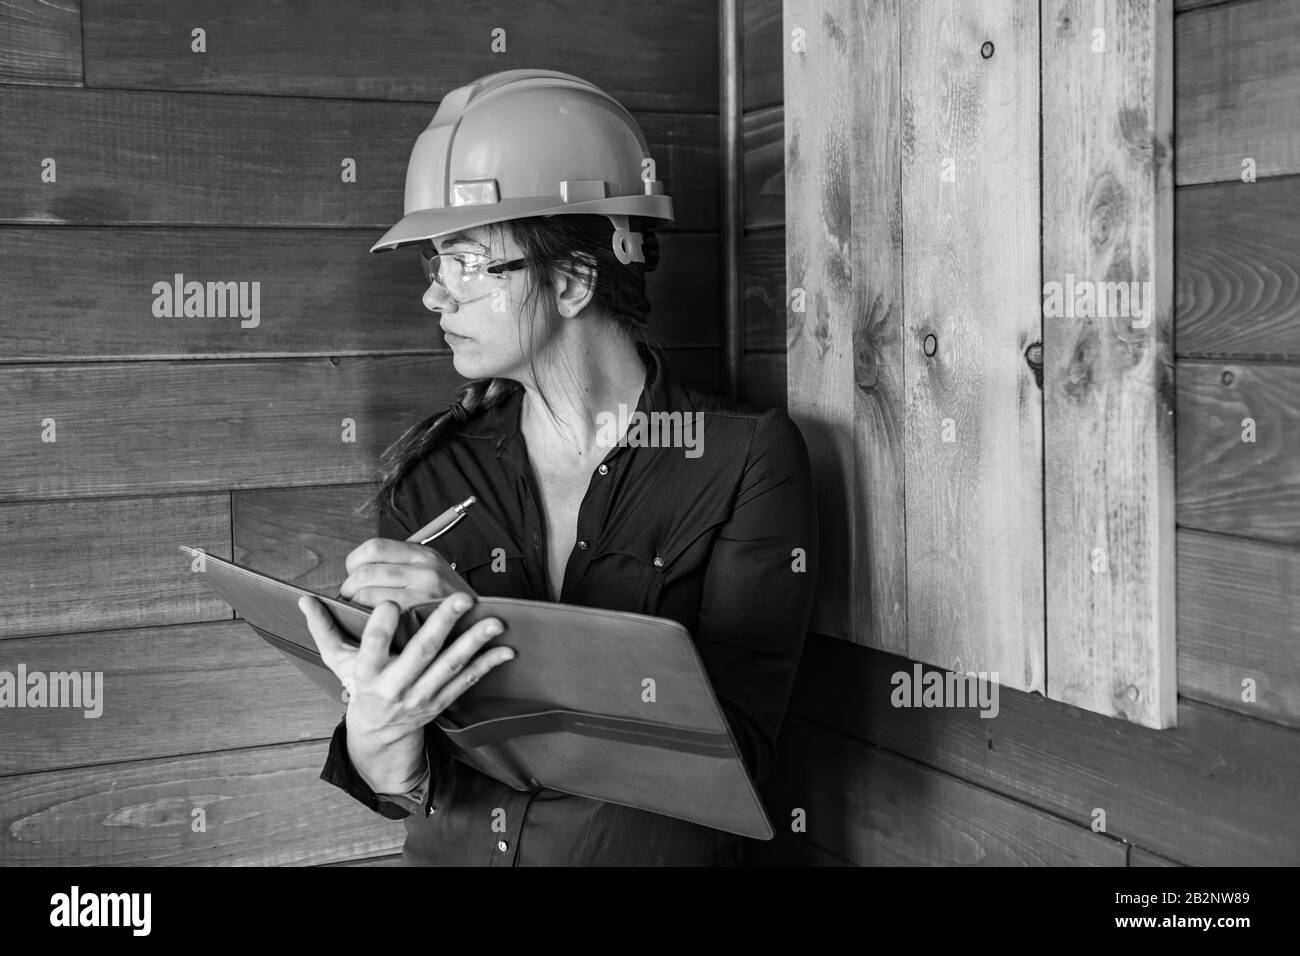 inspector woman taking notes on clipboard during Indoor air quality inspection she looking for molds, fungi problems on wooden walls, black and white Stock Photo